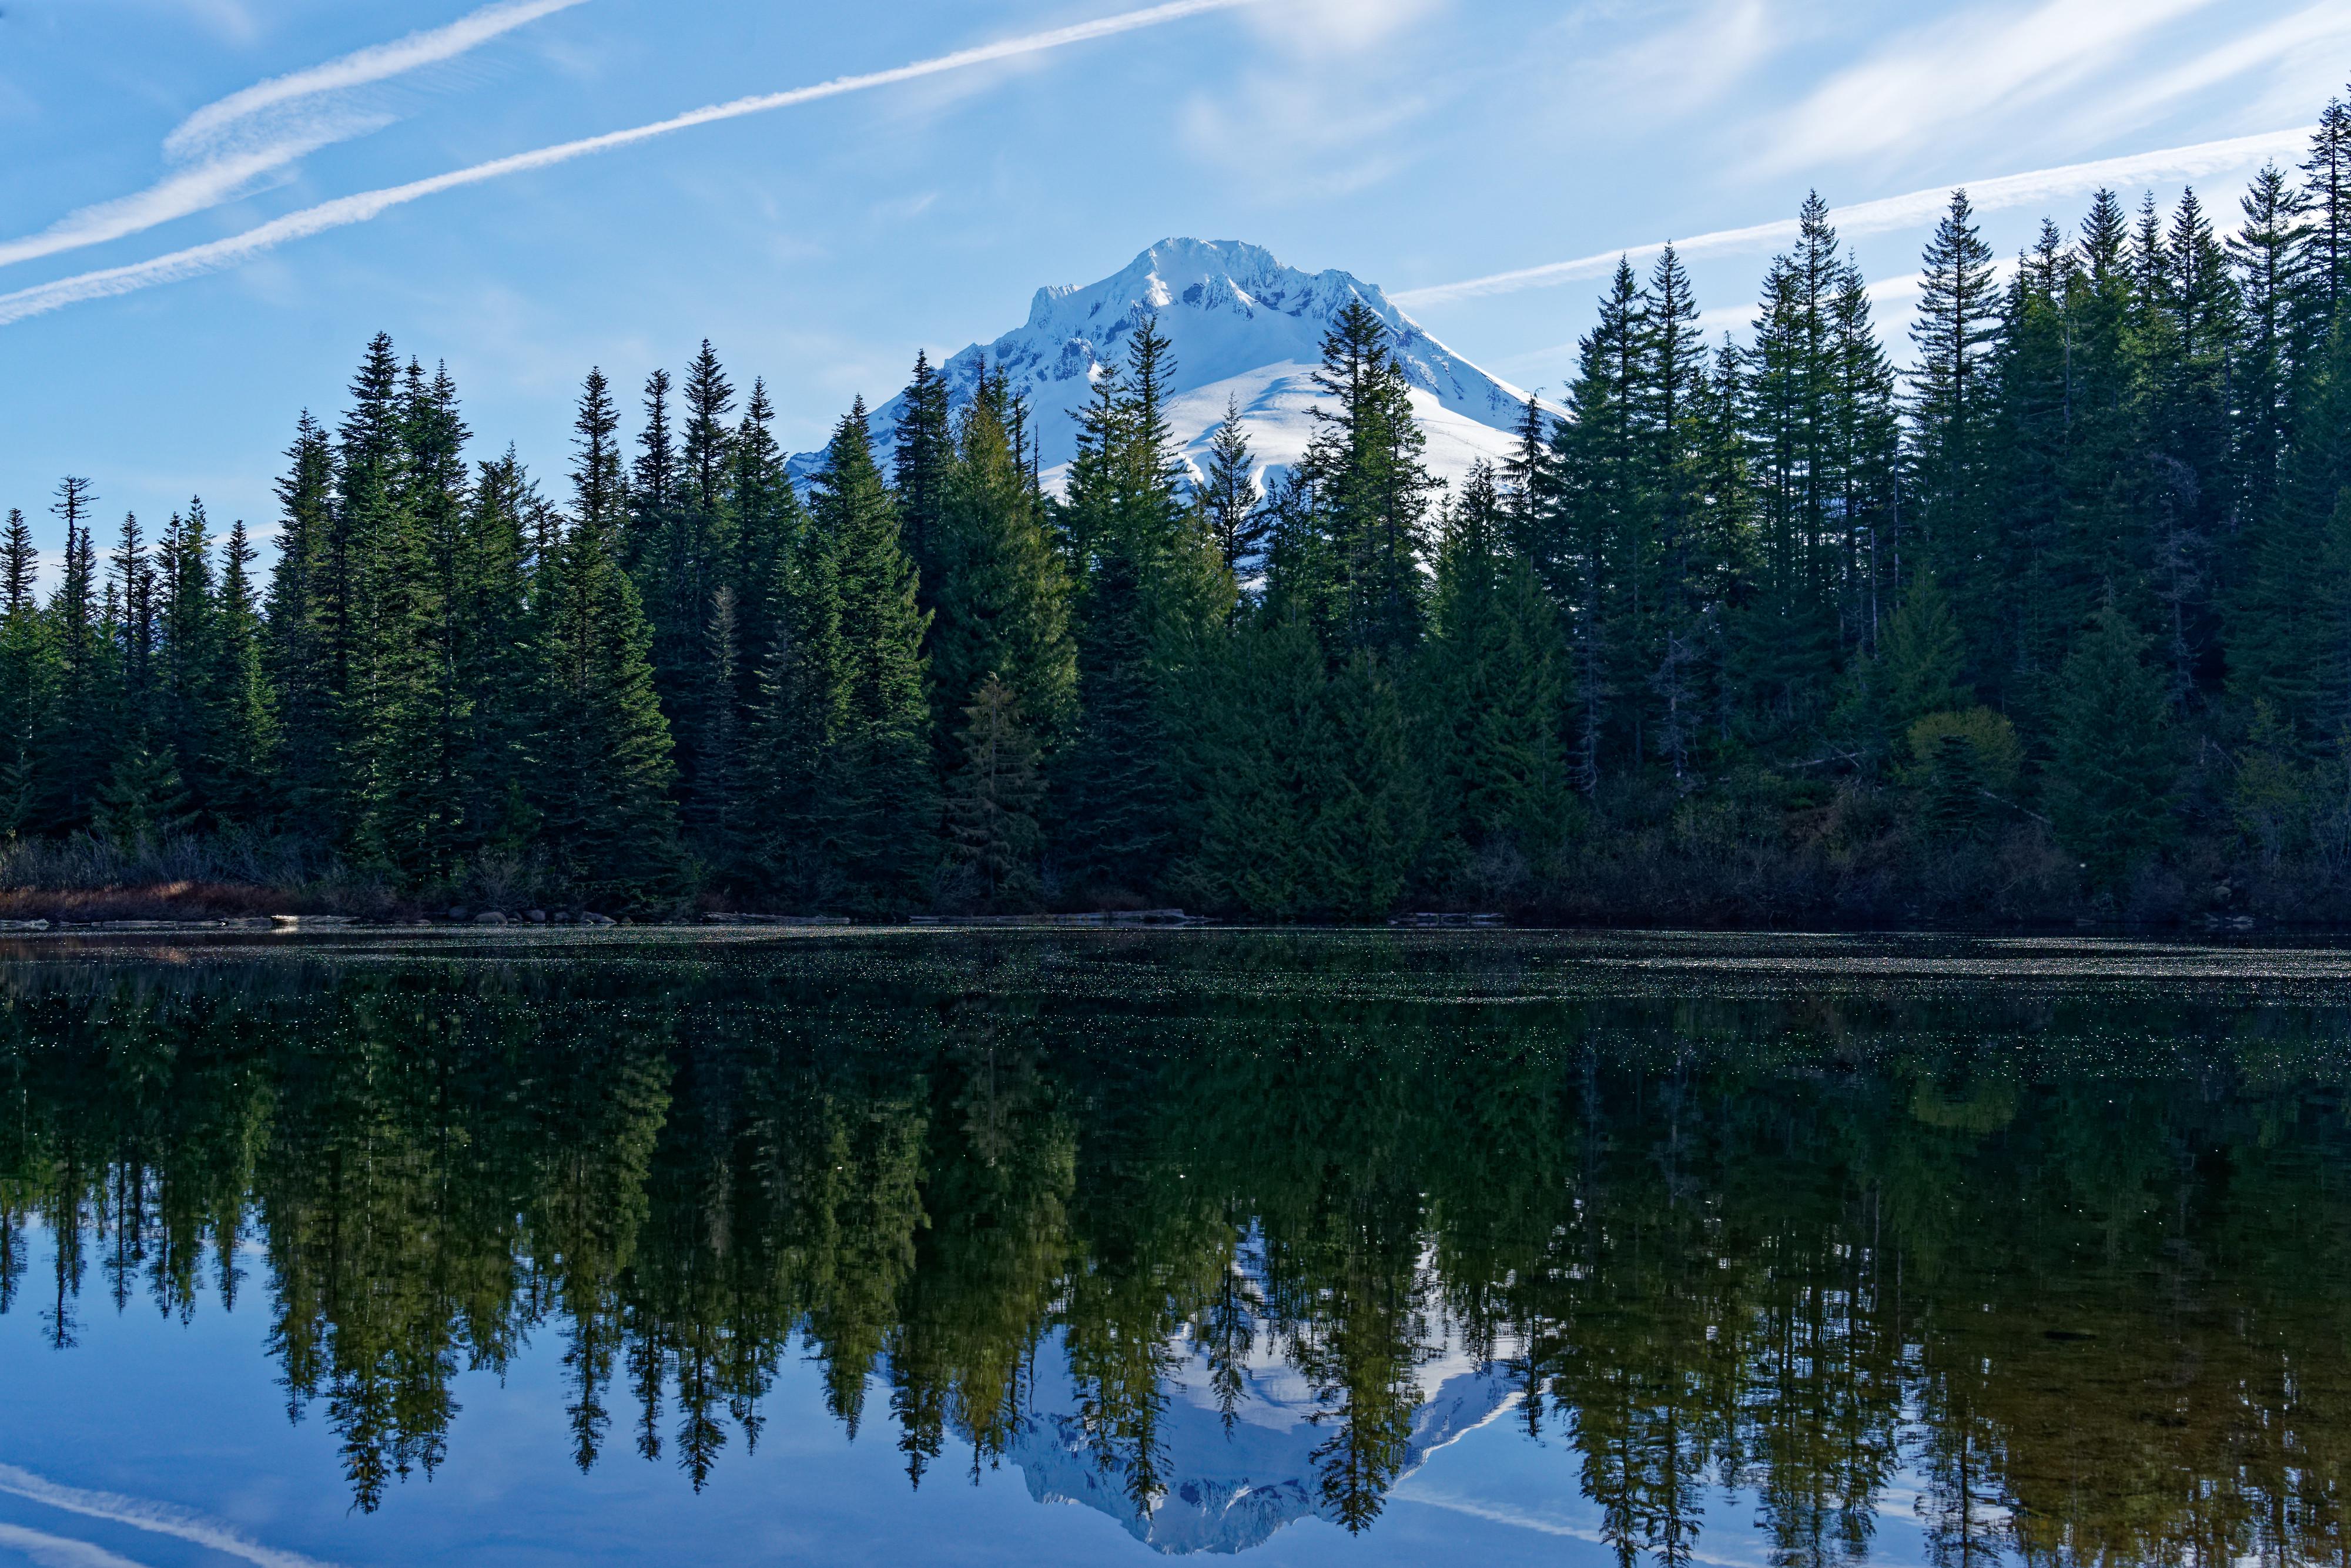 General 4000x2668 landscape mountains forest trees PiNe lake mirror Oregon USA nature